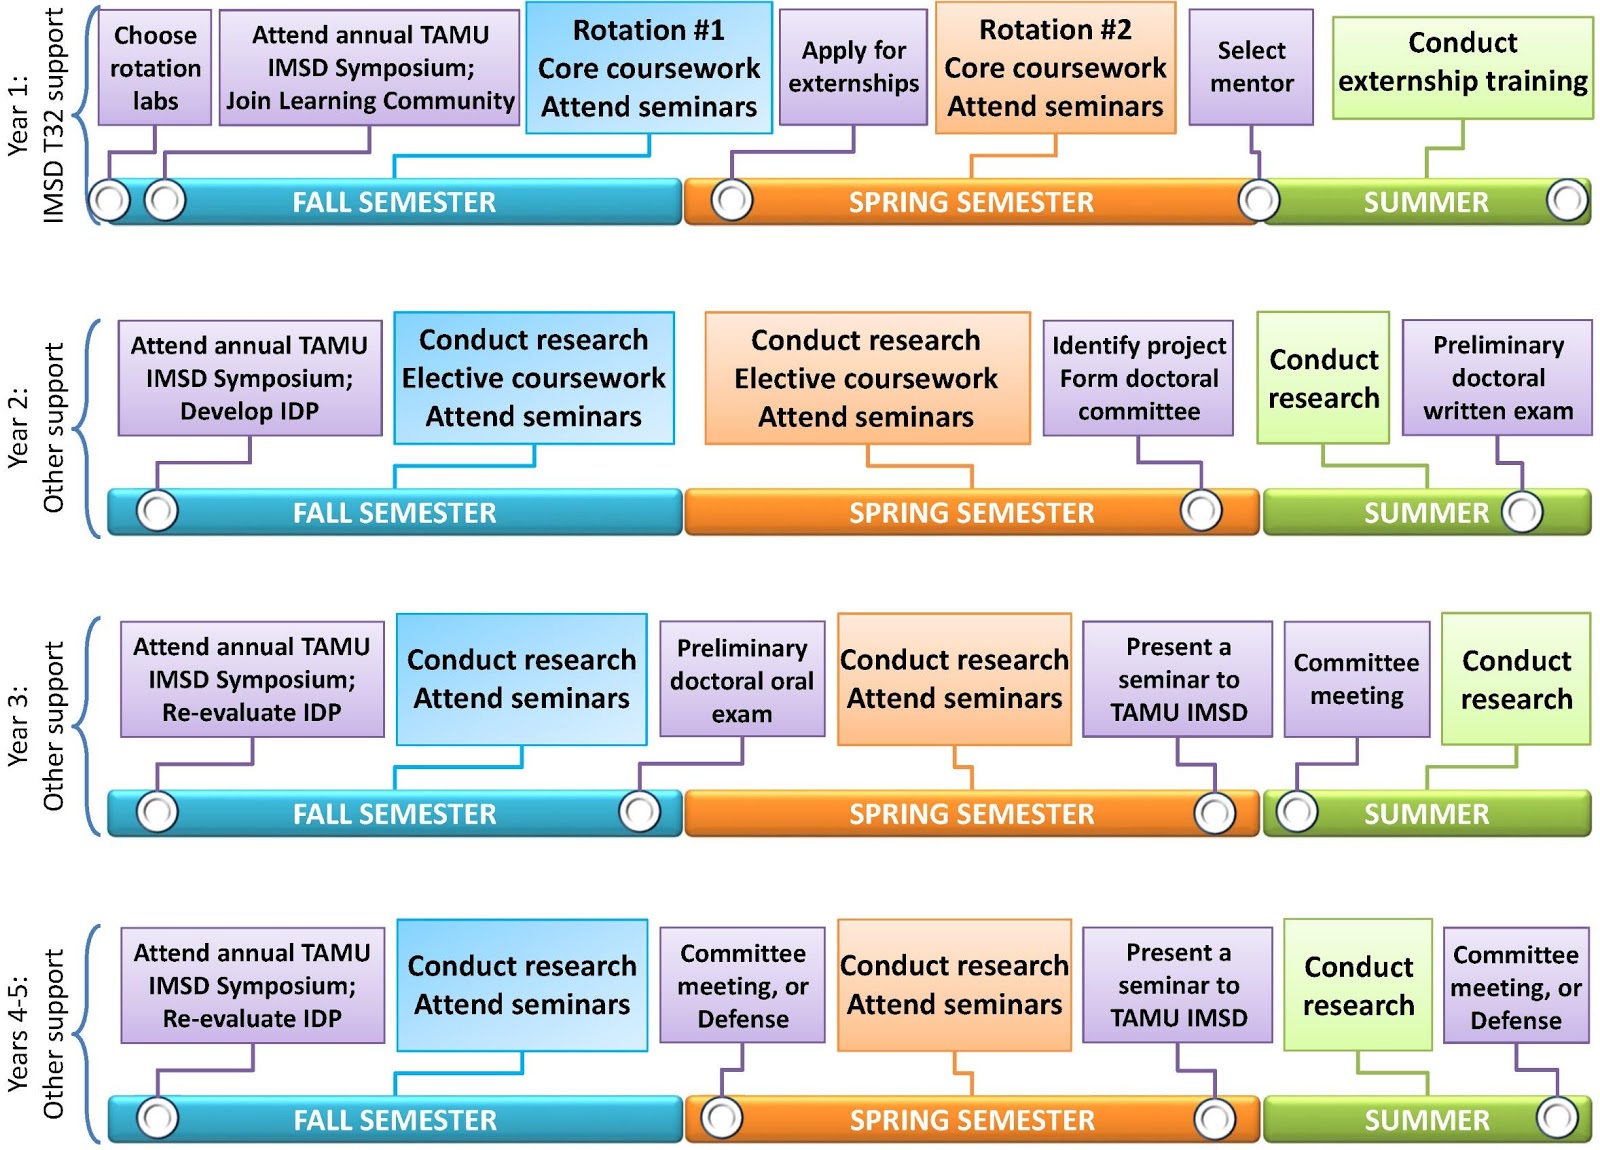 The training timeline and 11 implementation activities for the TAMU IMSD model